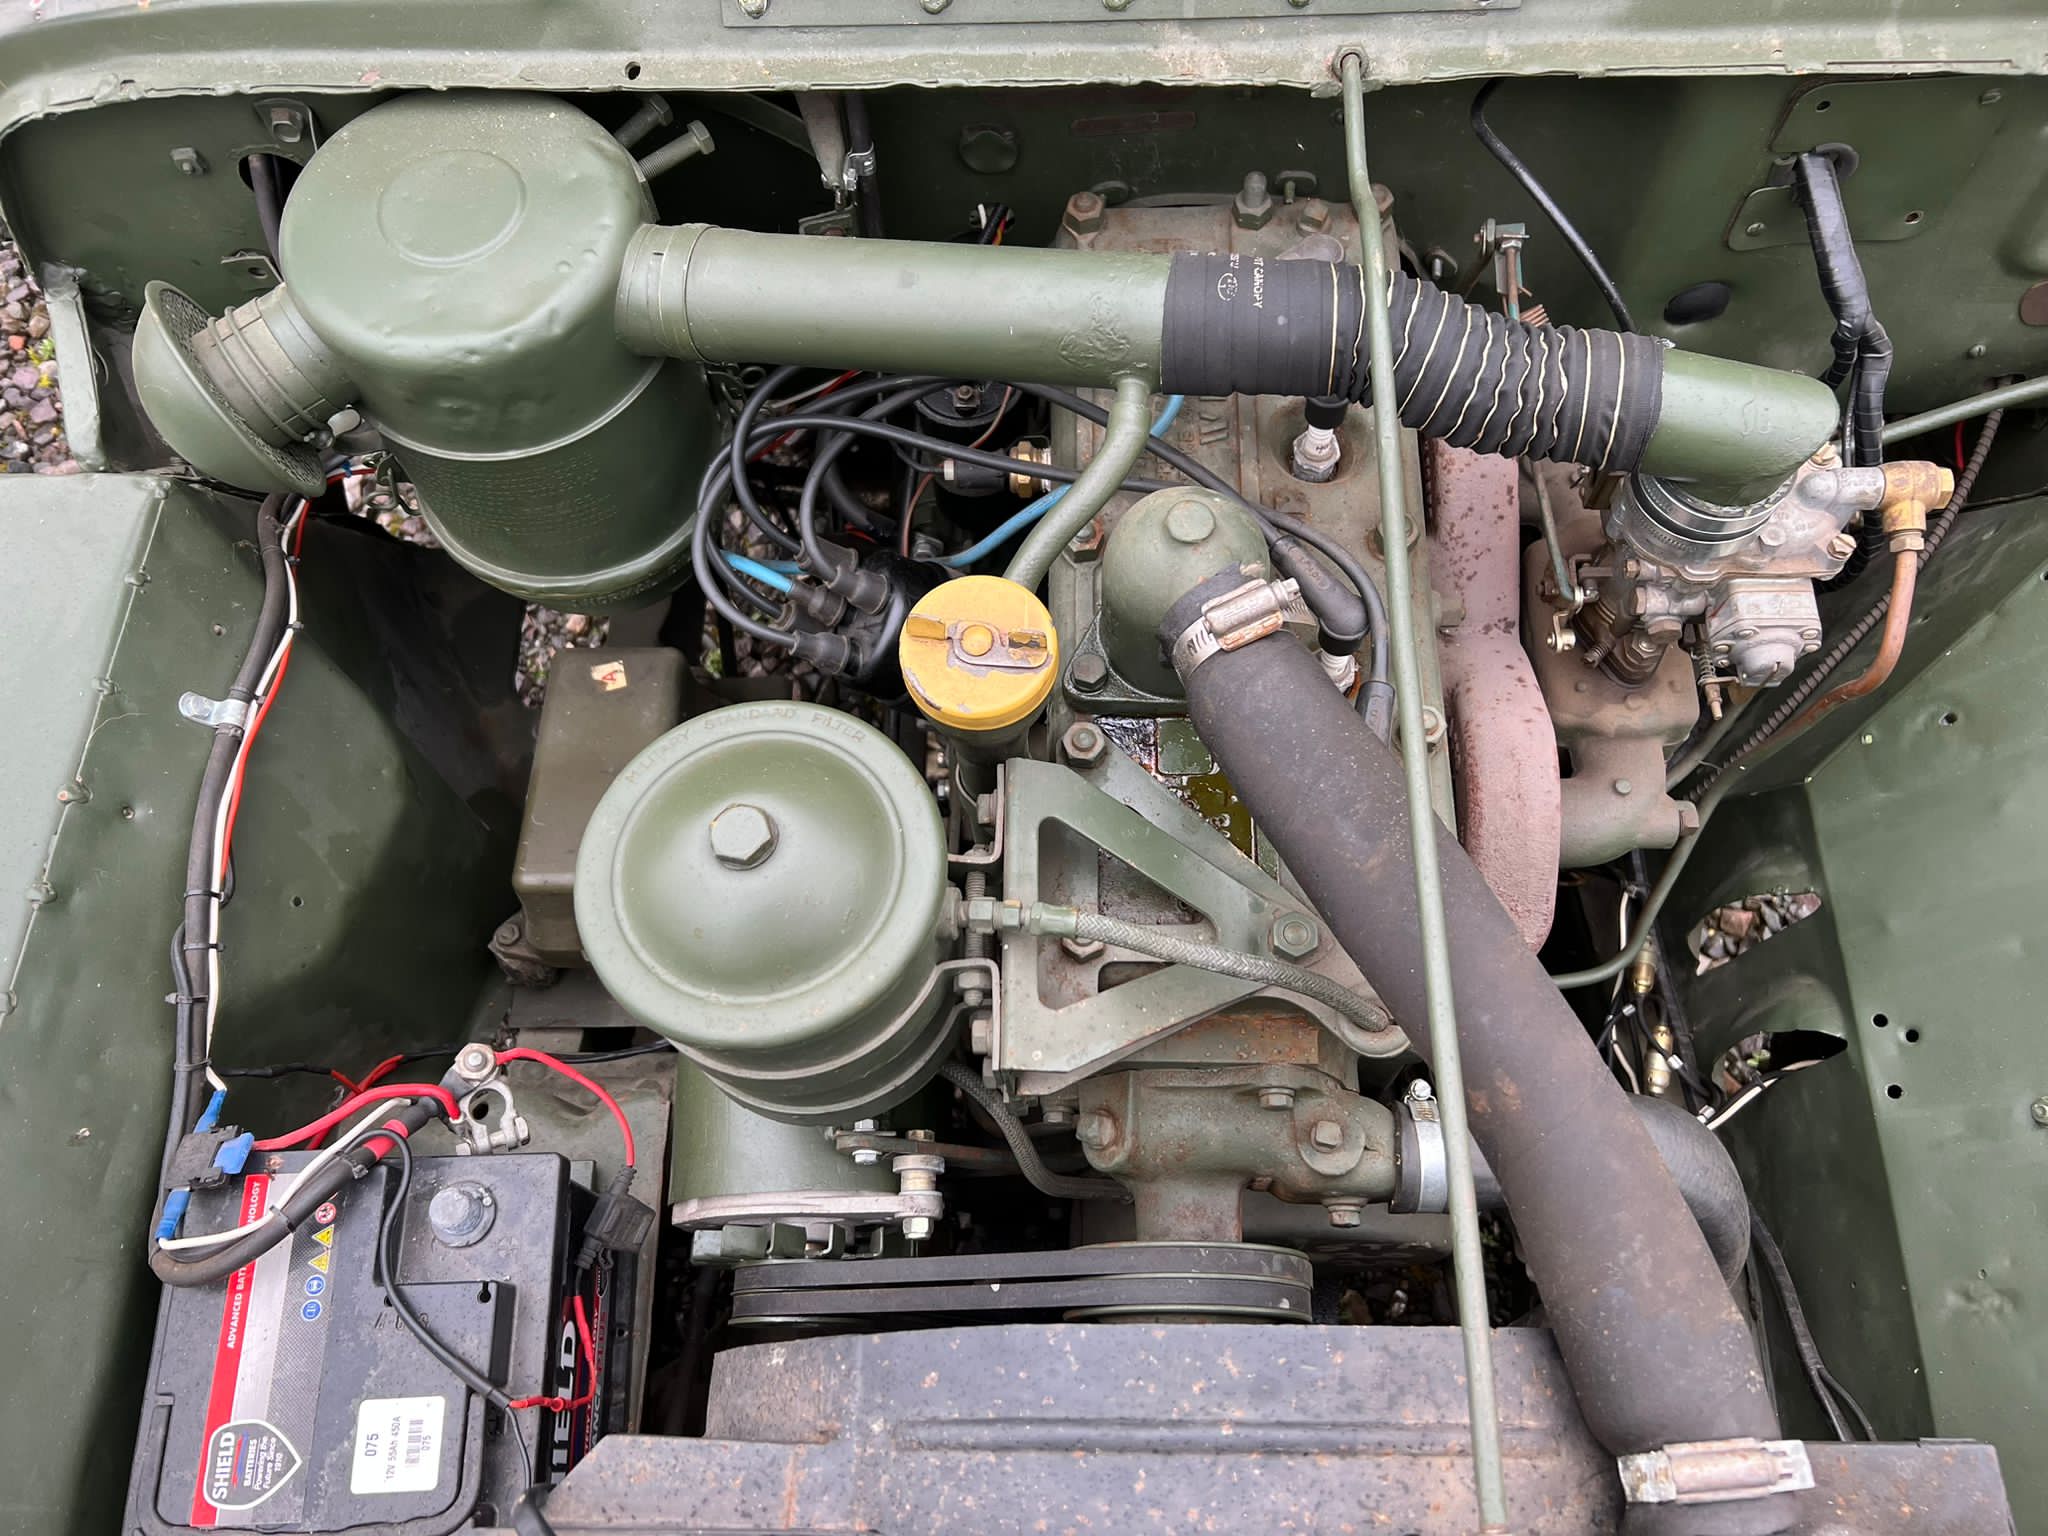 Willys Jeep Model M38 c1947 - Image 12 of 13